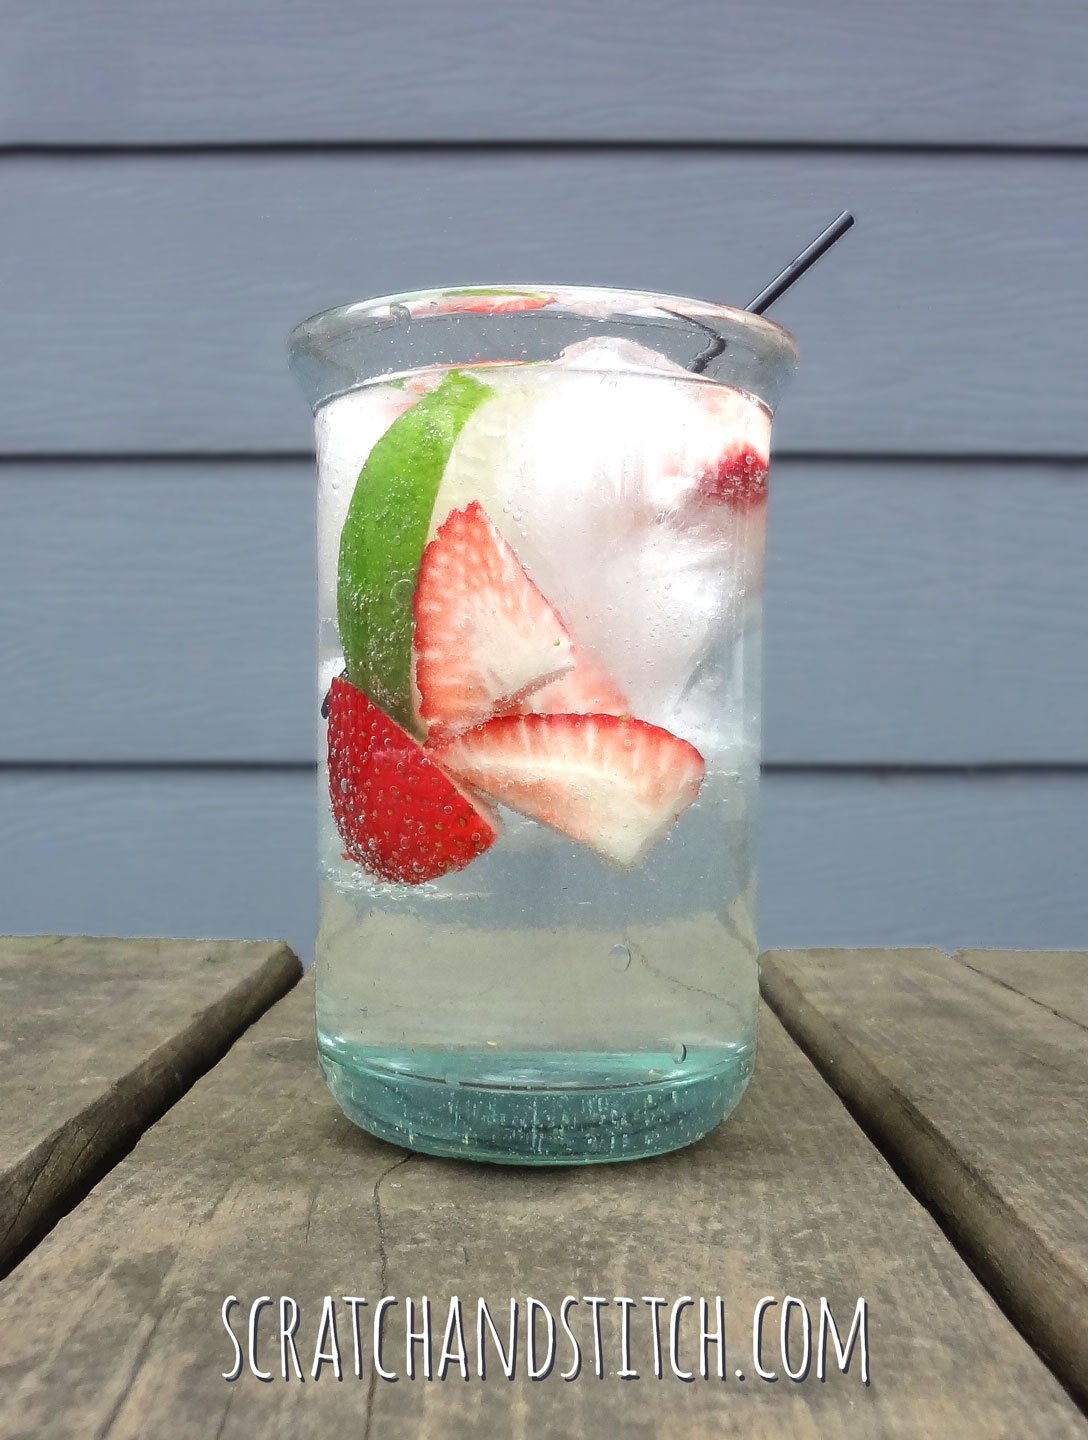 Vodka Soda with Strawberries and lLime - scratchandstitch.com